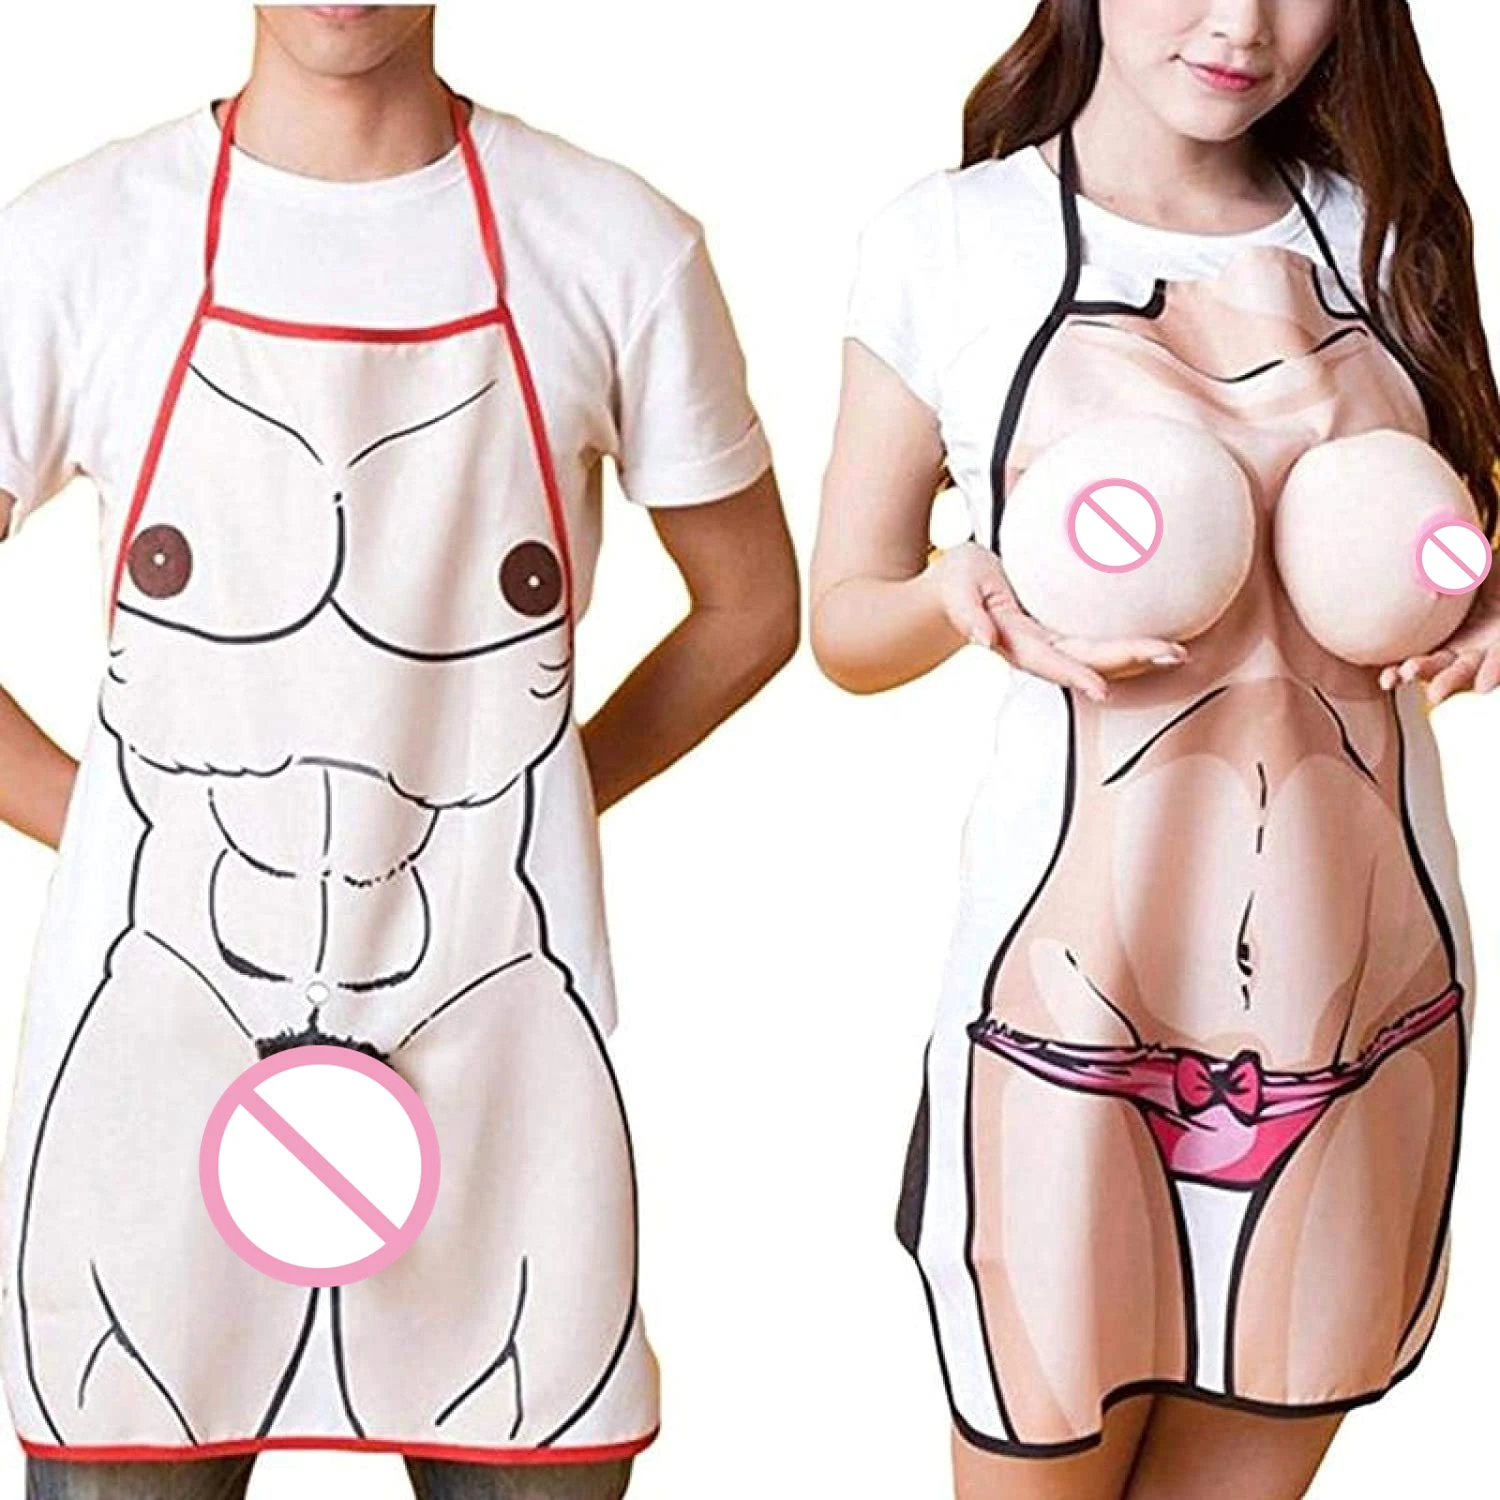 

Adjustable Funny Cooking Apron Sexy Kitchen Dinner Party Baking Aprons For Woman And Man delantales BBQ Party Cartoon Apron